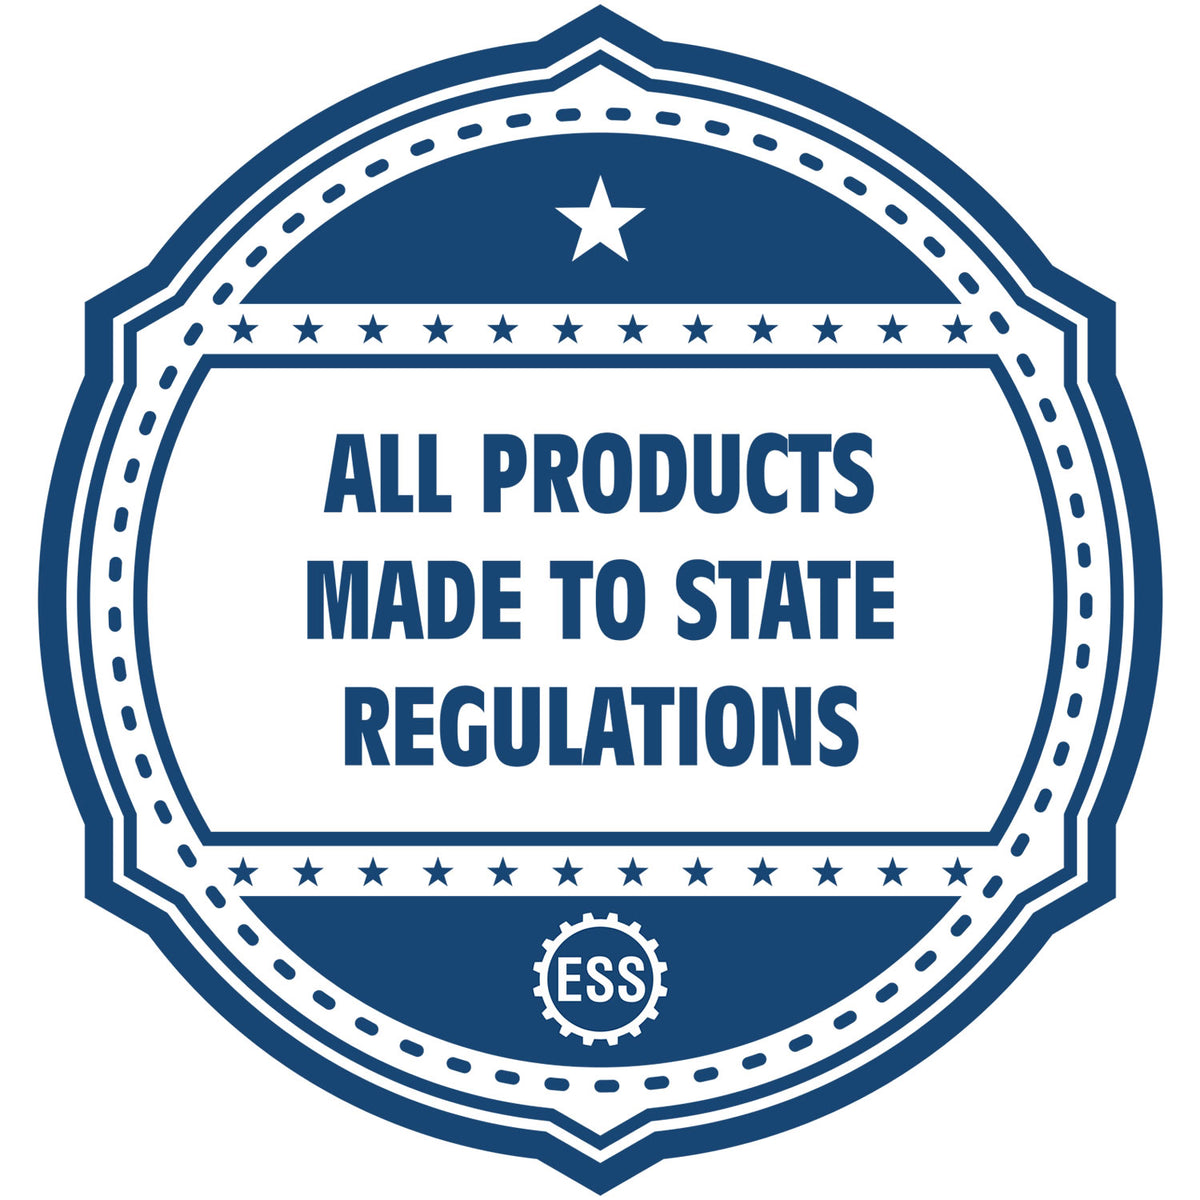 An icon or badge element for the Slim Pre-Inked Pennsylvania Architect Seal Stamp showing that this product is made in compliance with state regulations.